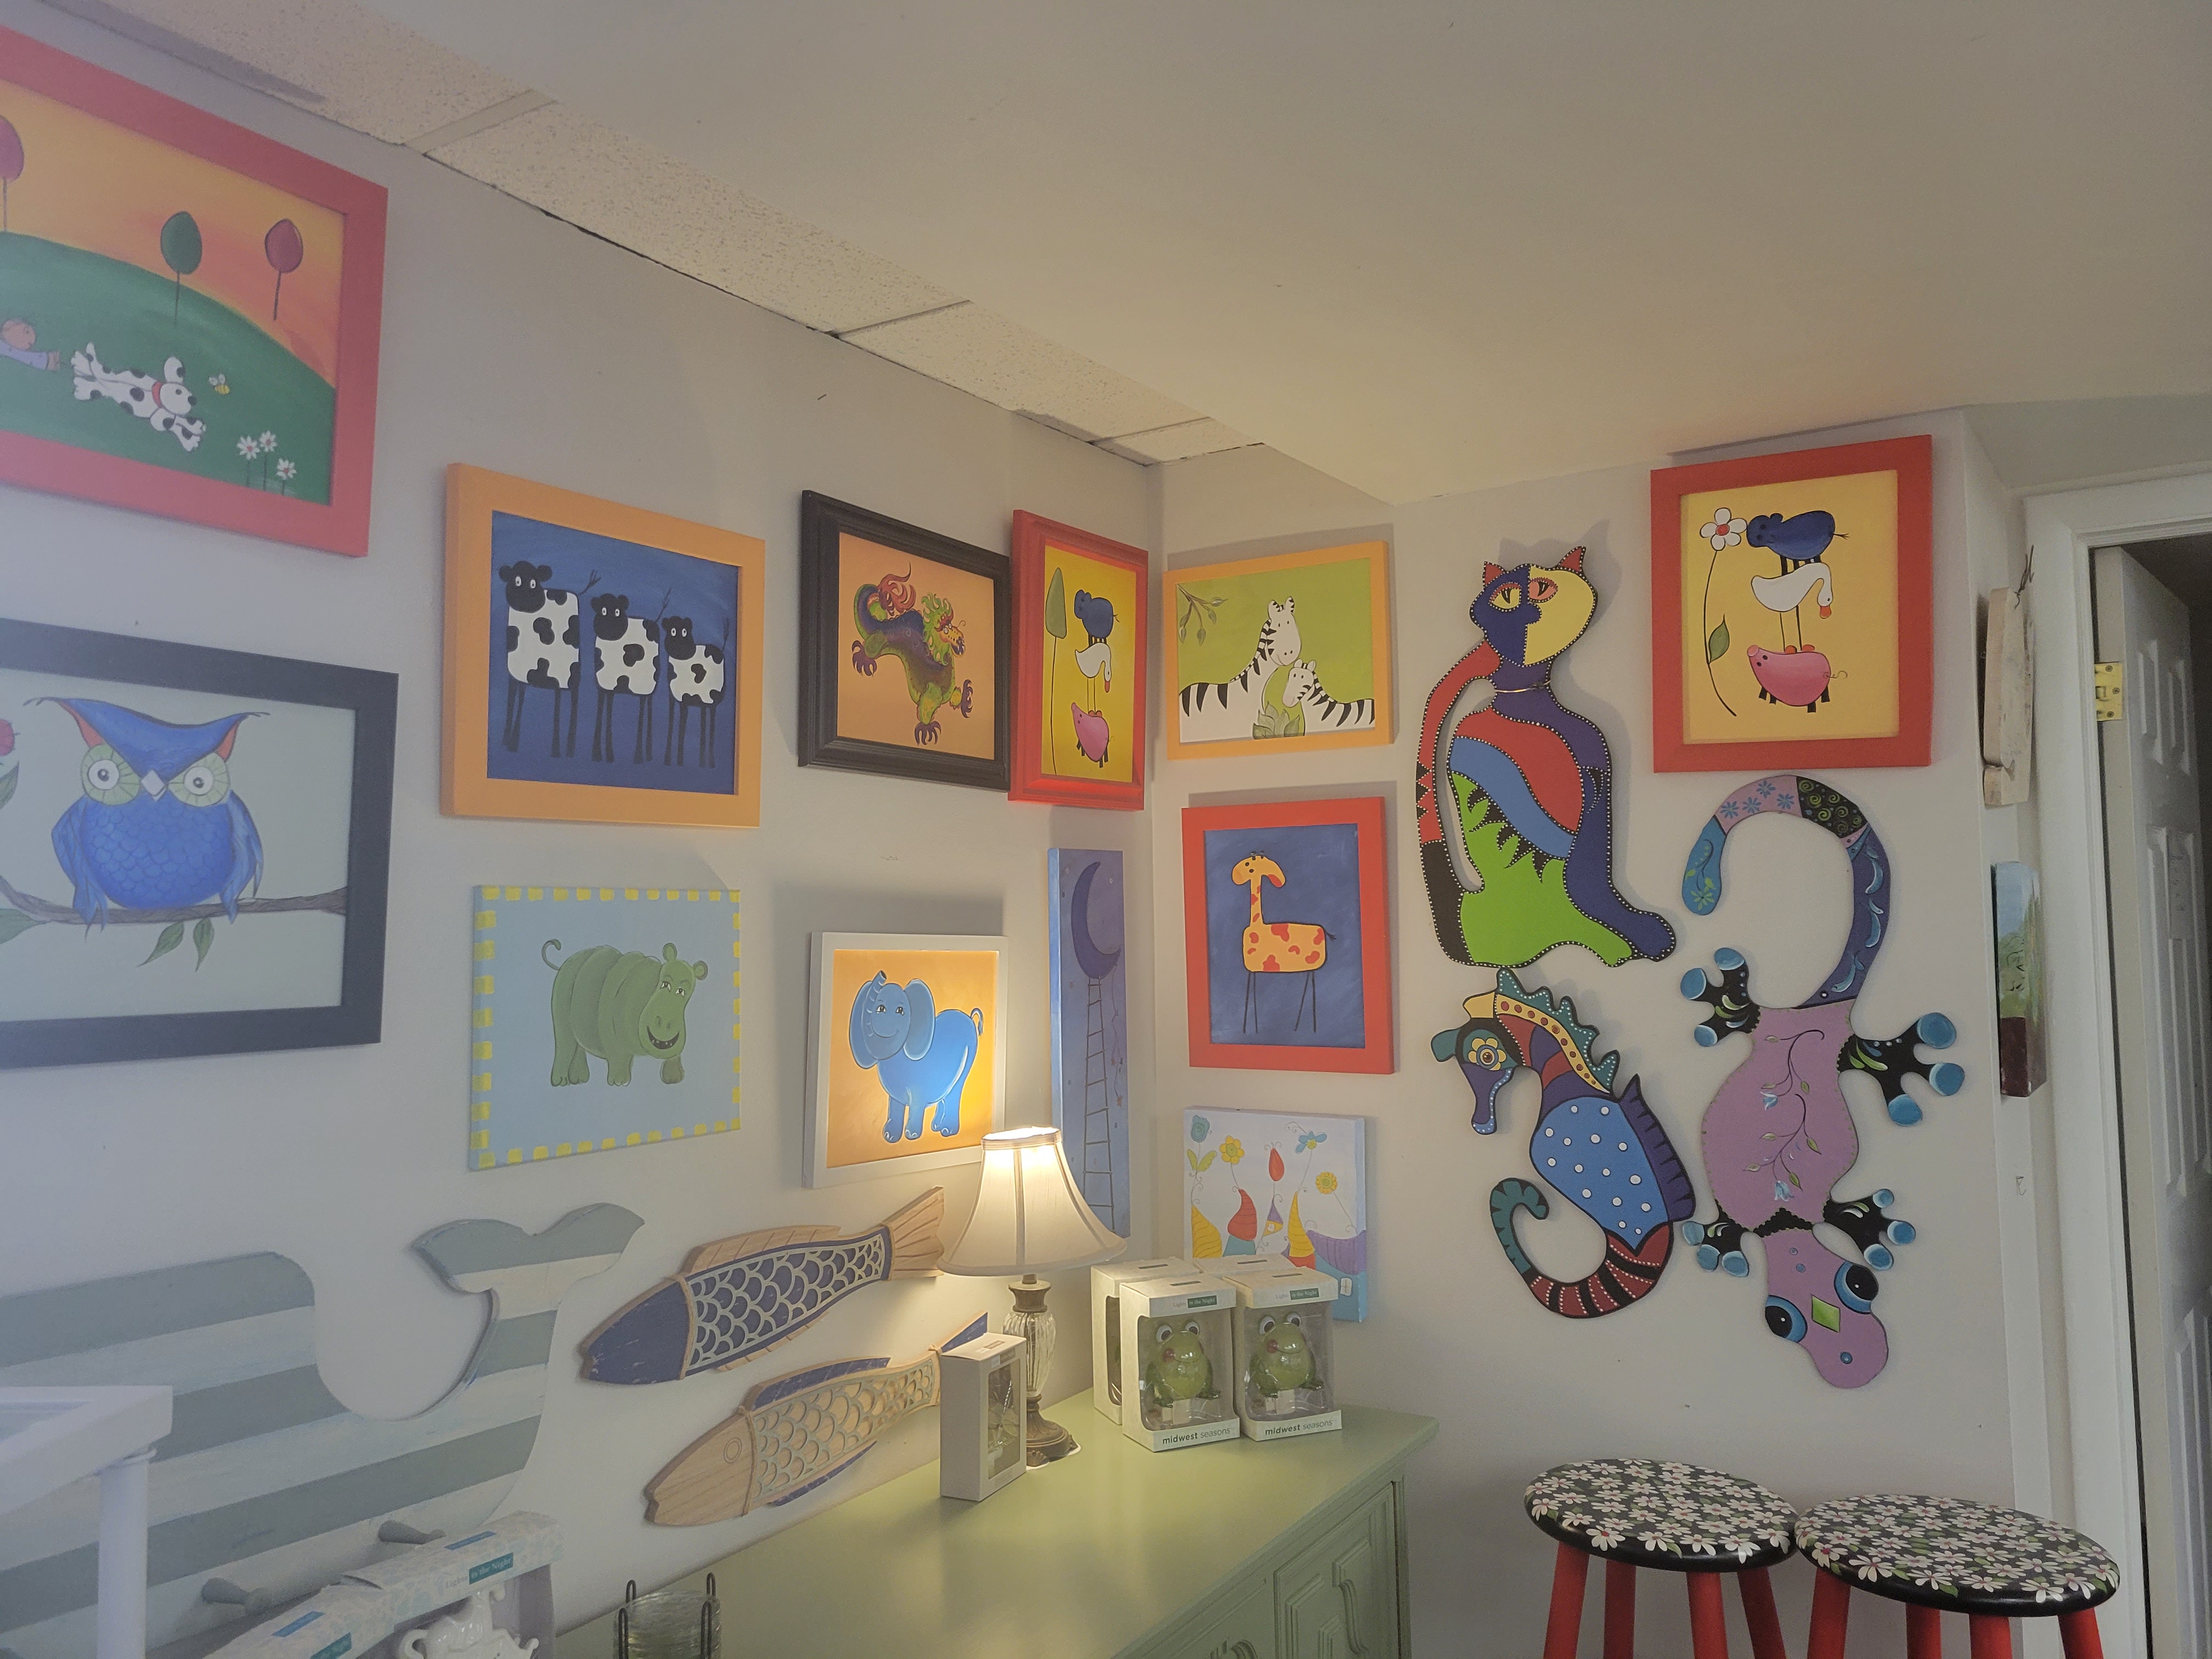 Hanging on a Whim in Towson houses hand crafted colorful art for anyone looking to brighten up their home.